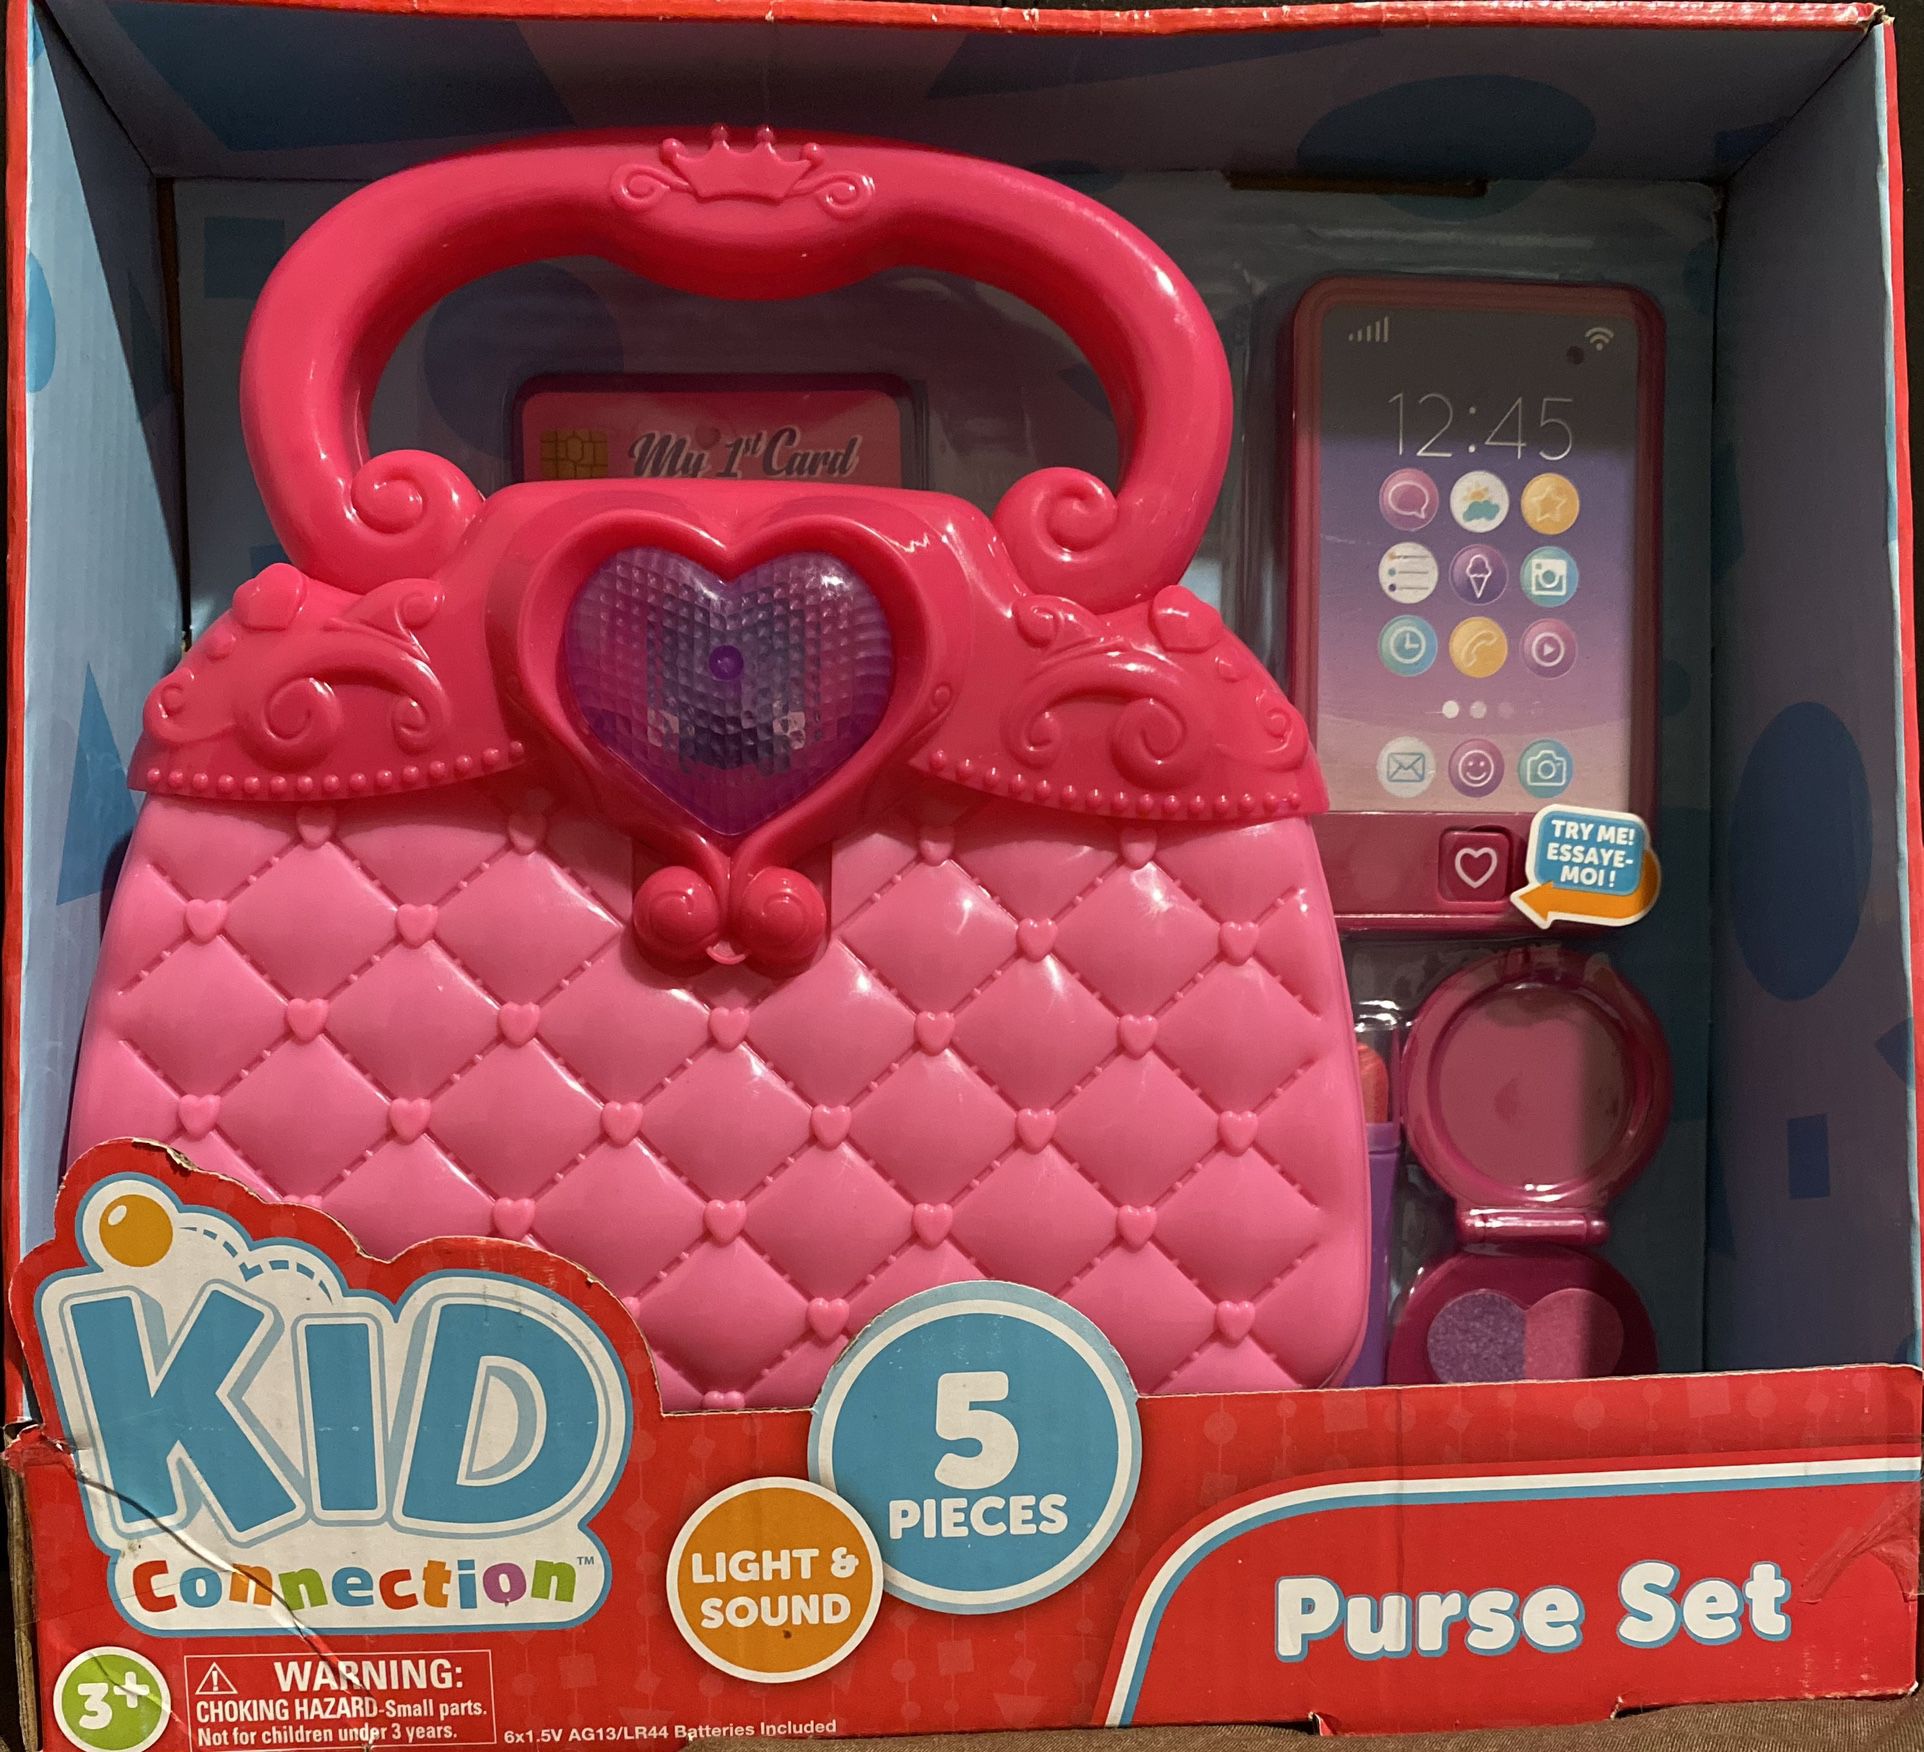 Kid Connection Light and Sound First Purse Play Set, Pink, 5 Pieces